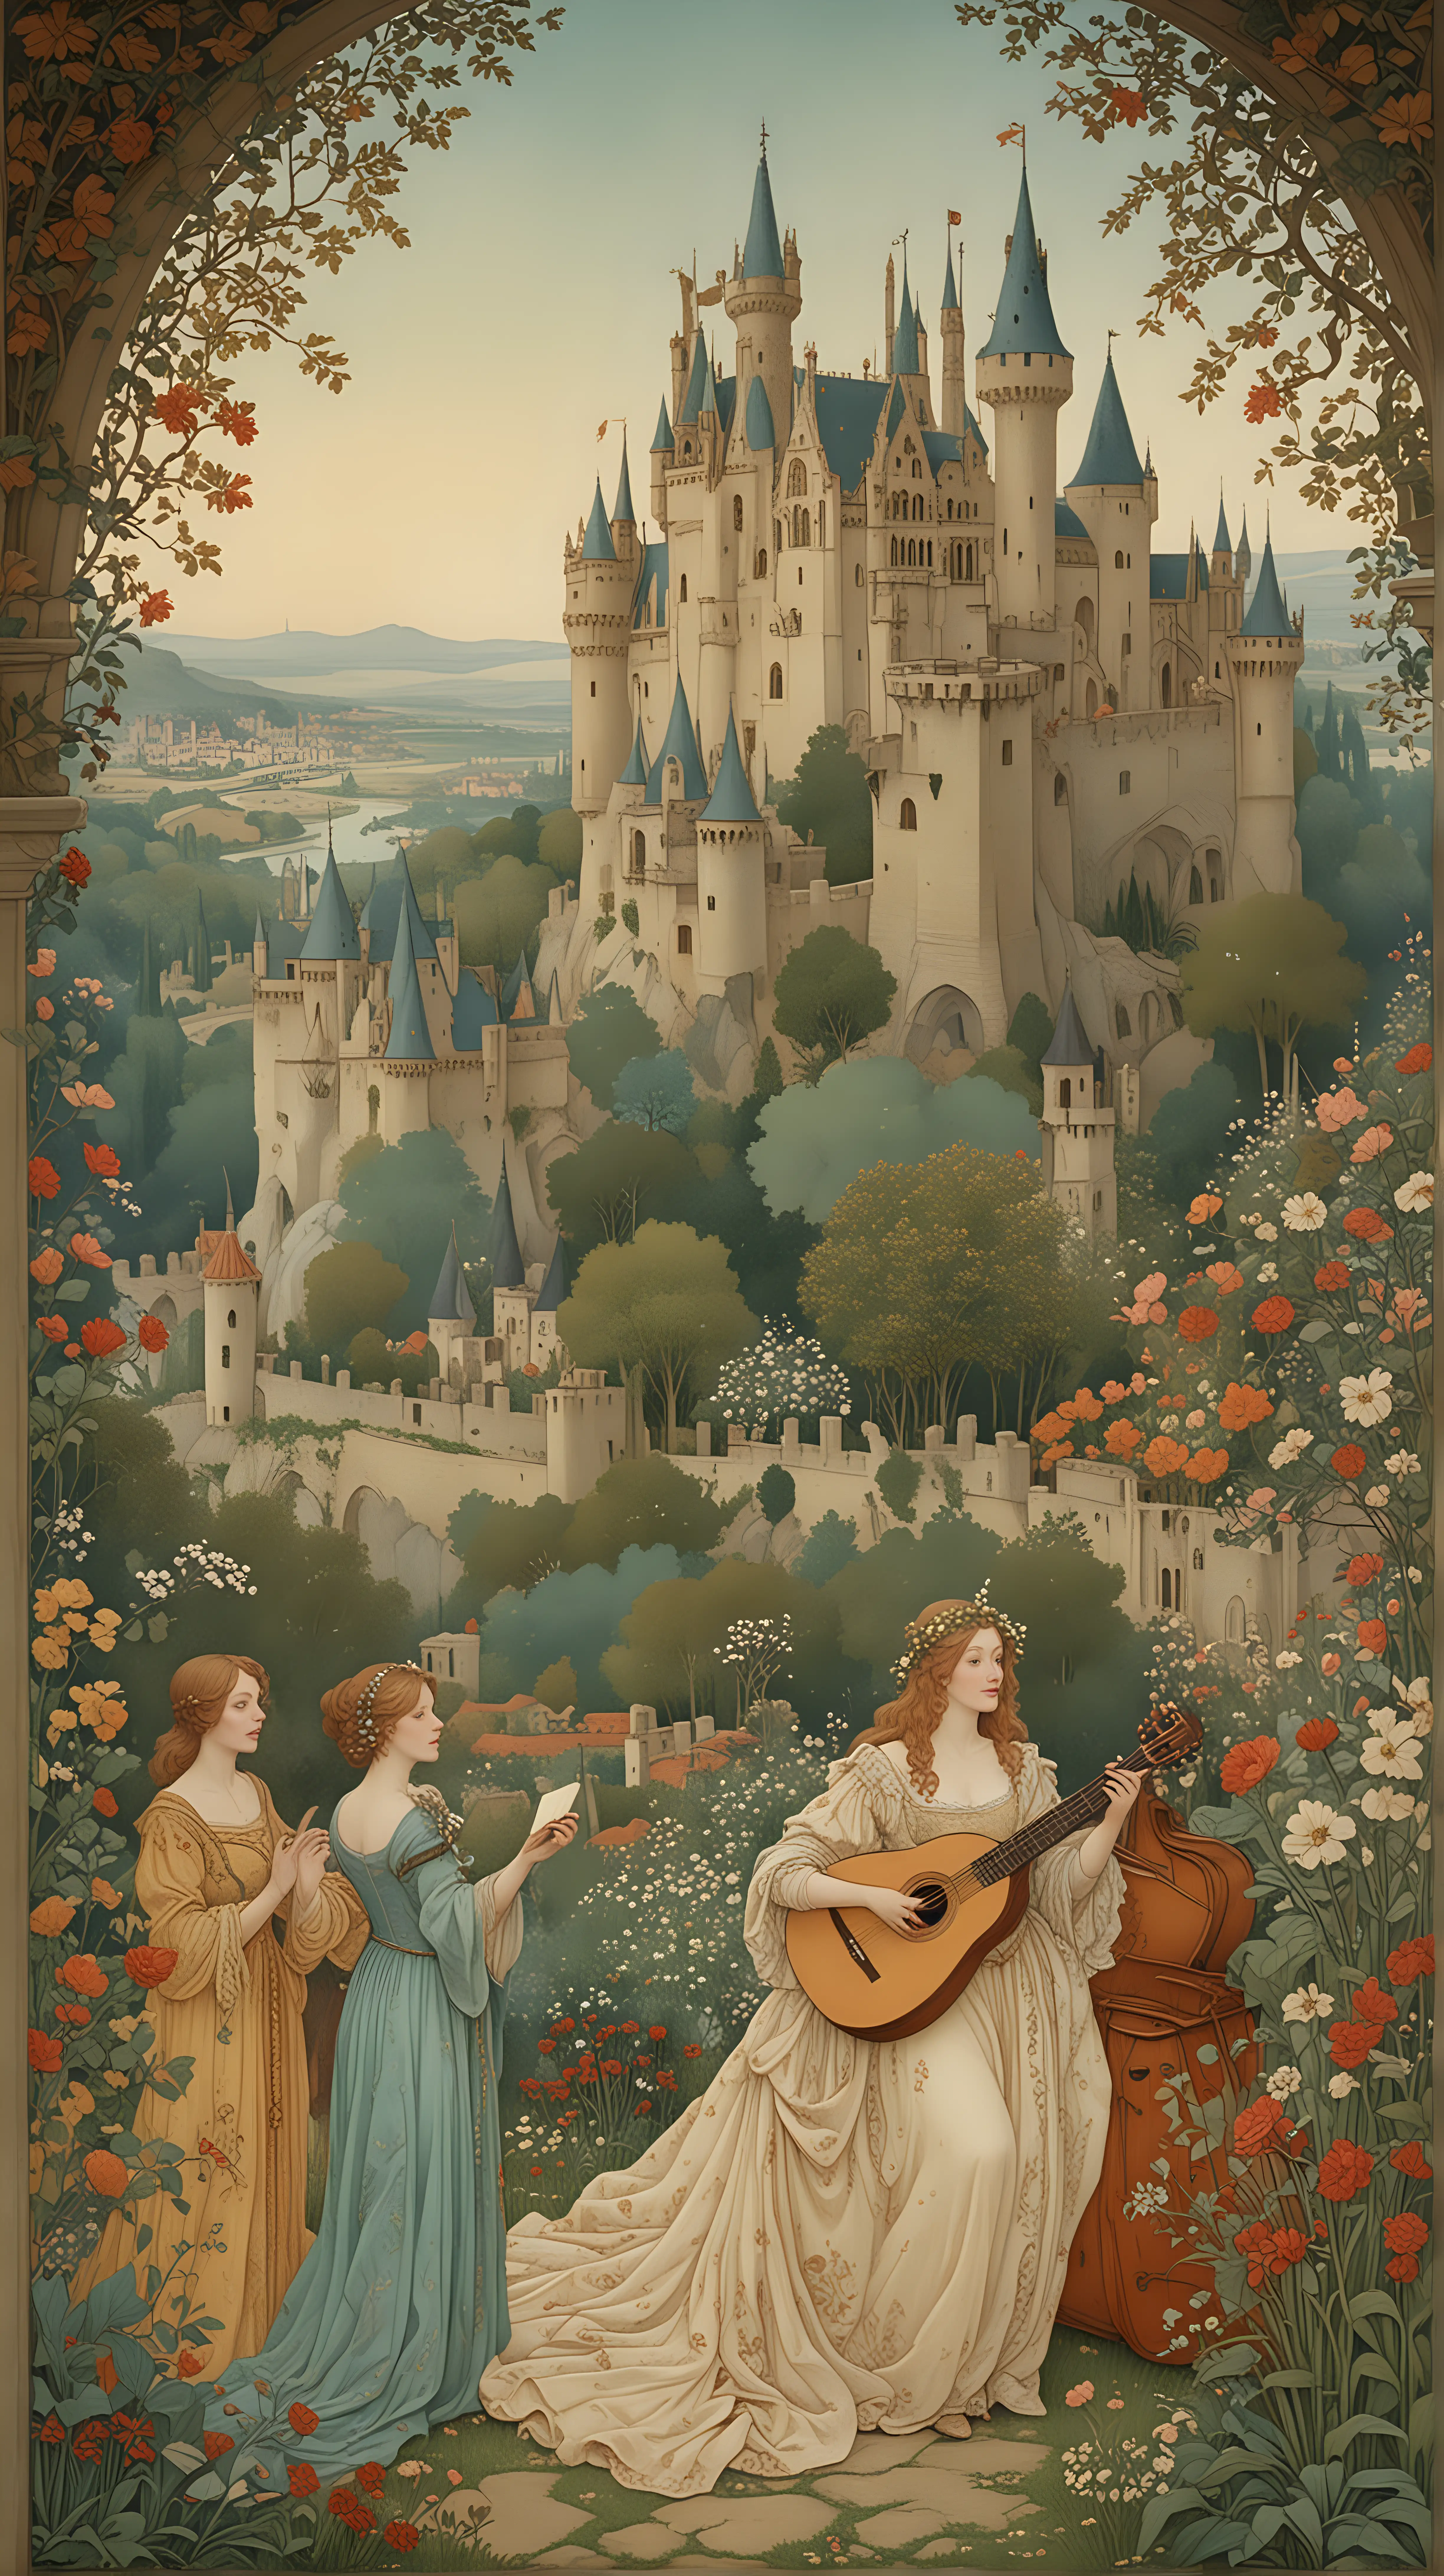 In the style of Dulac fairytale illustration, a troubadour with a lute serenading a medieval lady and her attendants in a garden with a castle in the backgroundIn the style of Dulac fairytale illustration, a troubadour with a lute serenading a medieval lady and her attendants in a garden with a castle in the background